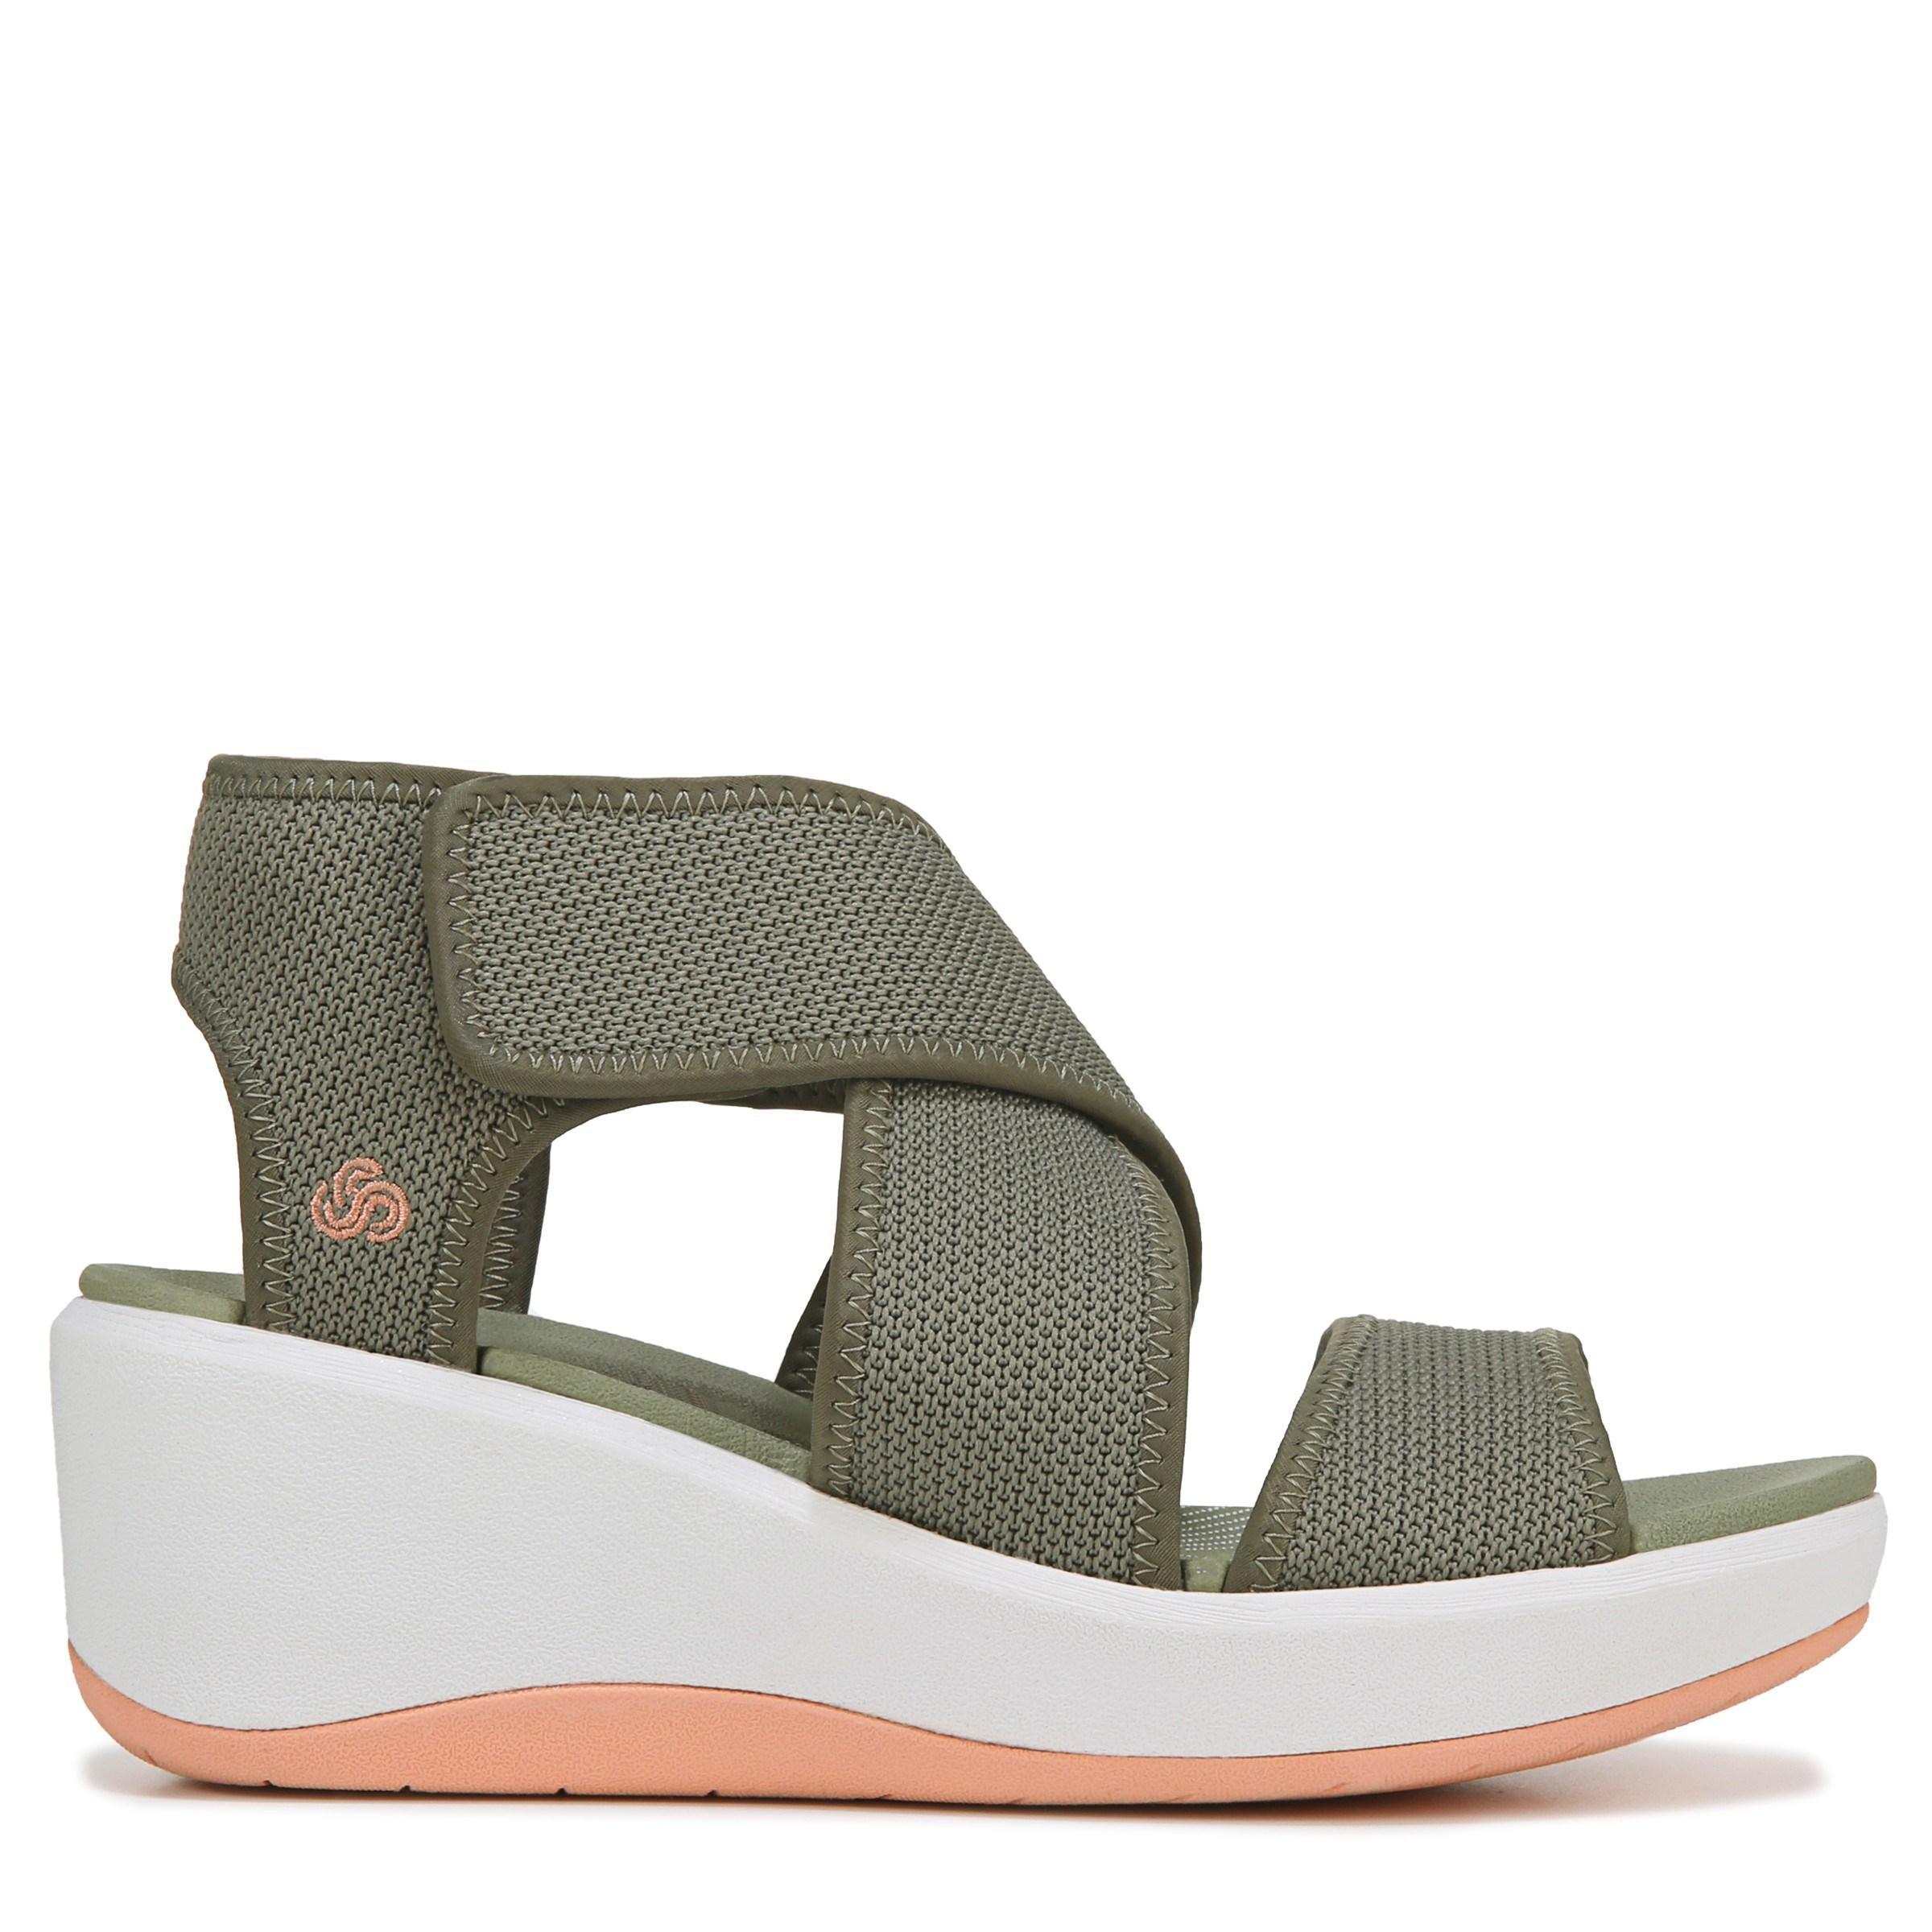 cloudsteppers by clarks step cali palm wedge sandal